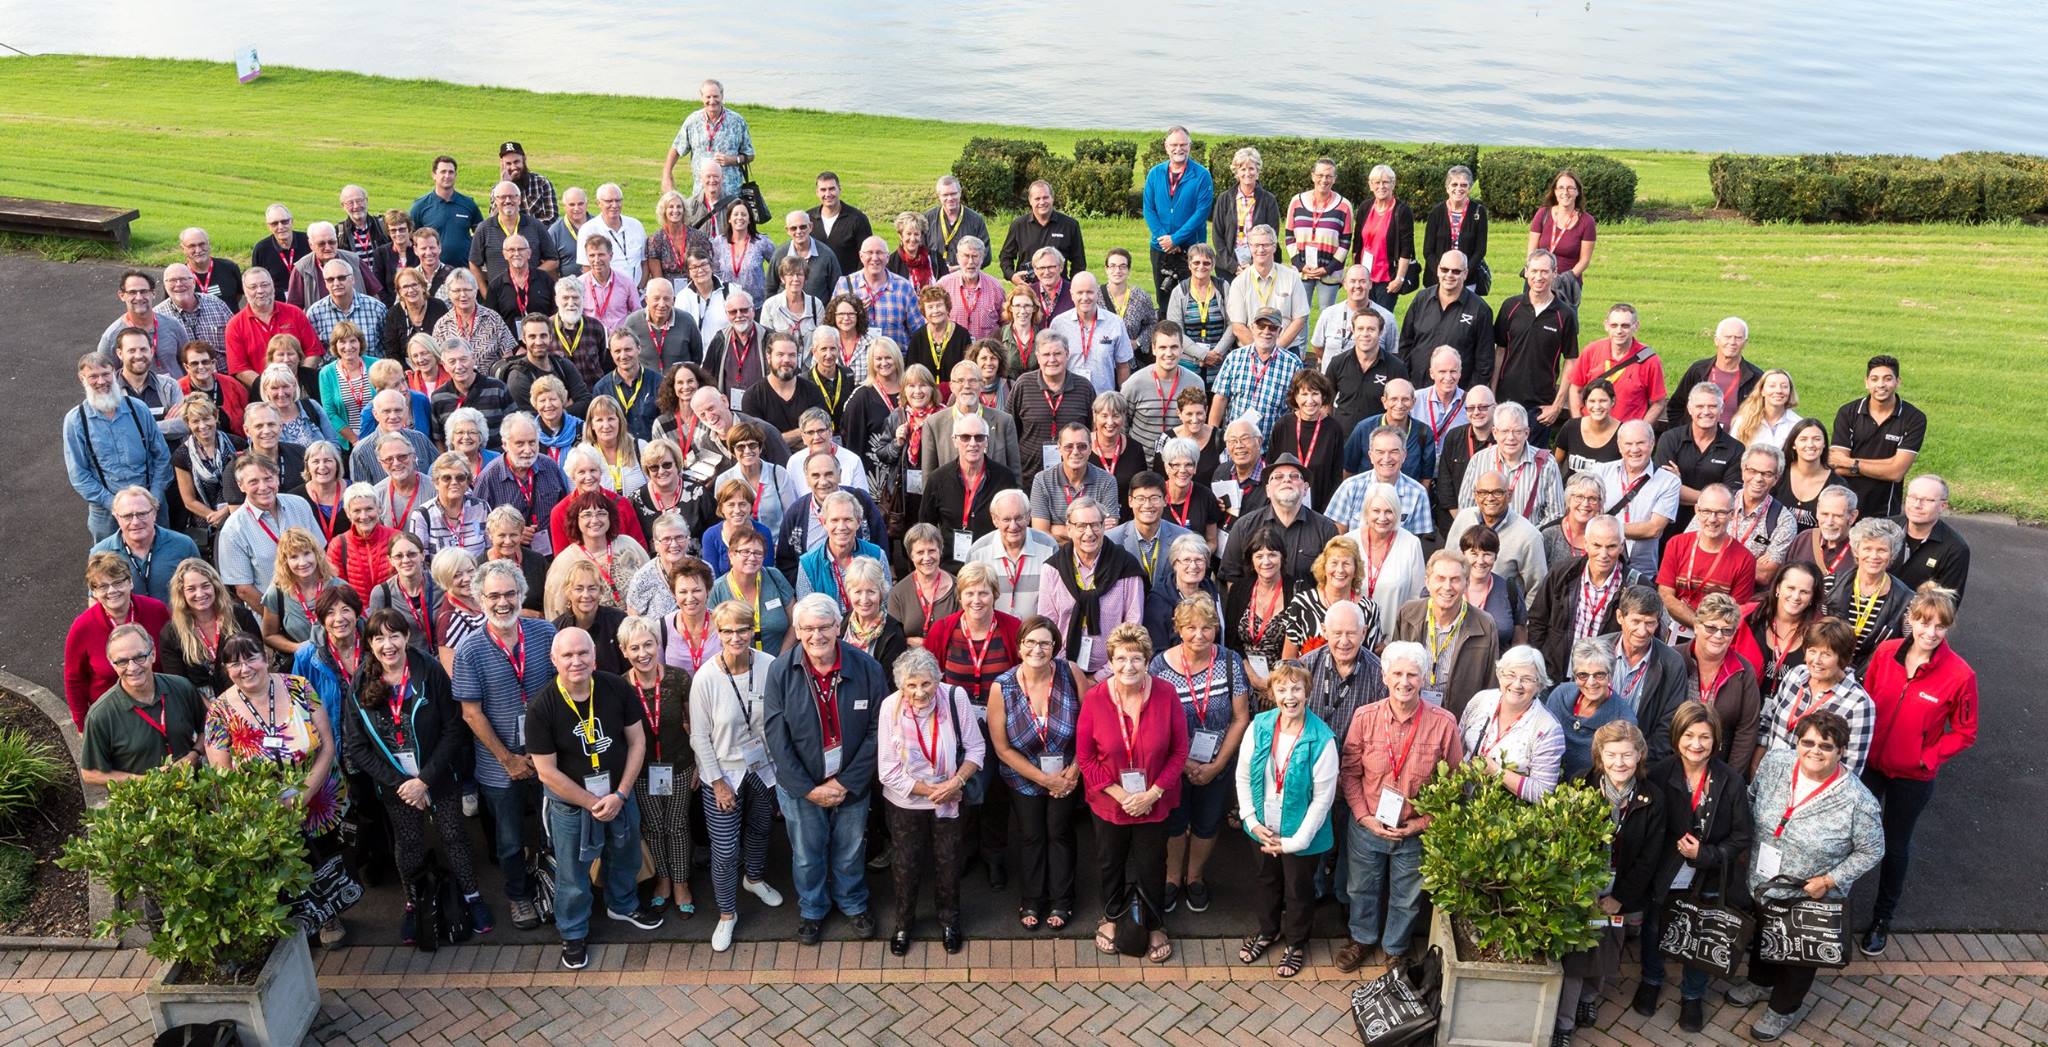 Photo from The 65th National Convention (2017), Photography on the Edge. Group photo courtesy of Sandrina Huish.